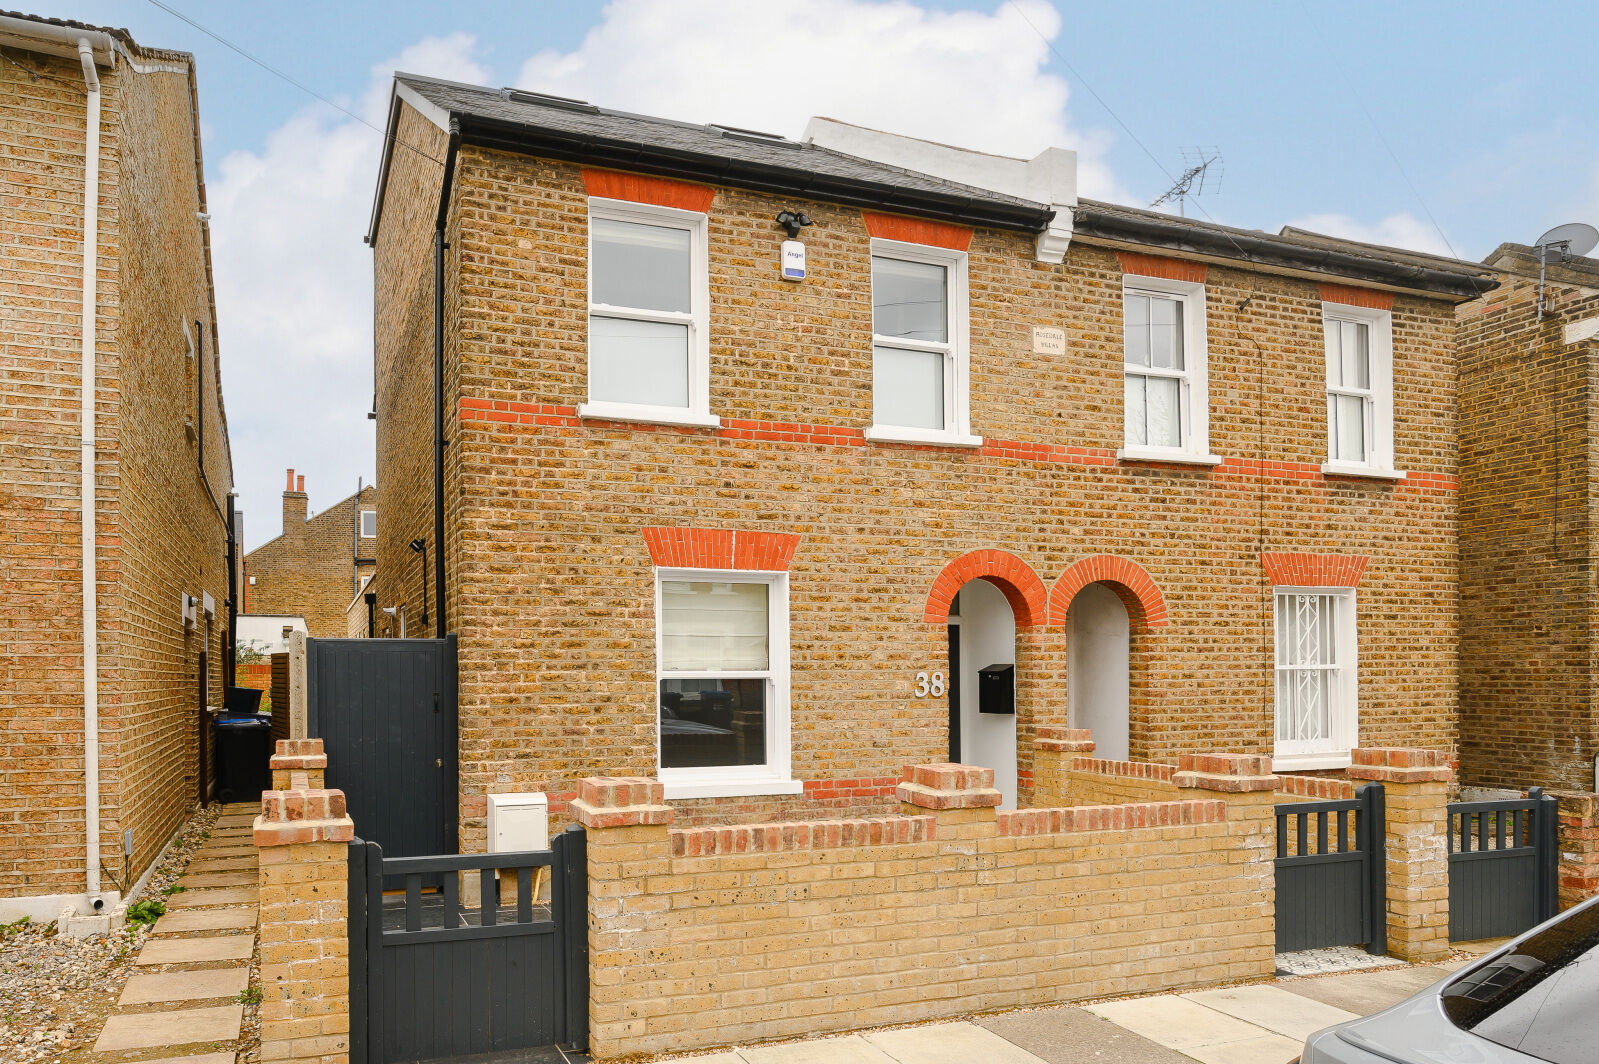 4 bedroom semi detached house for sale Palmerston Road, London, SW19, main image